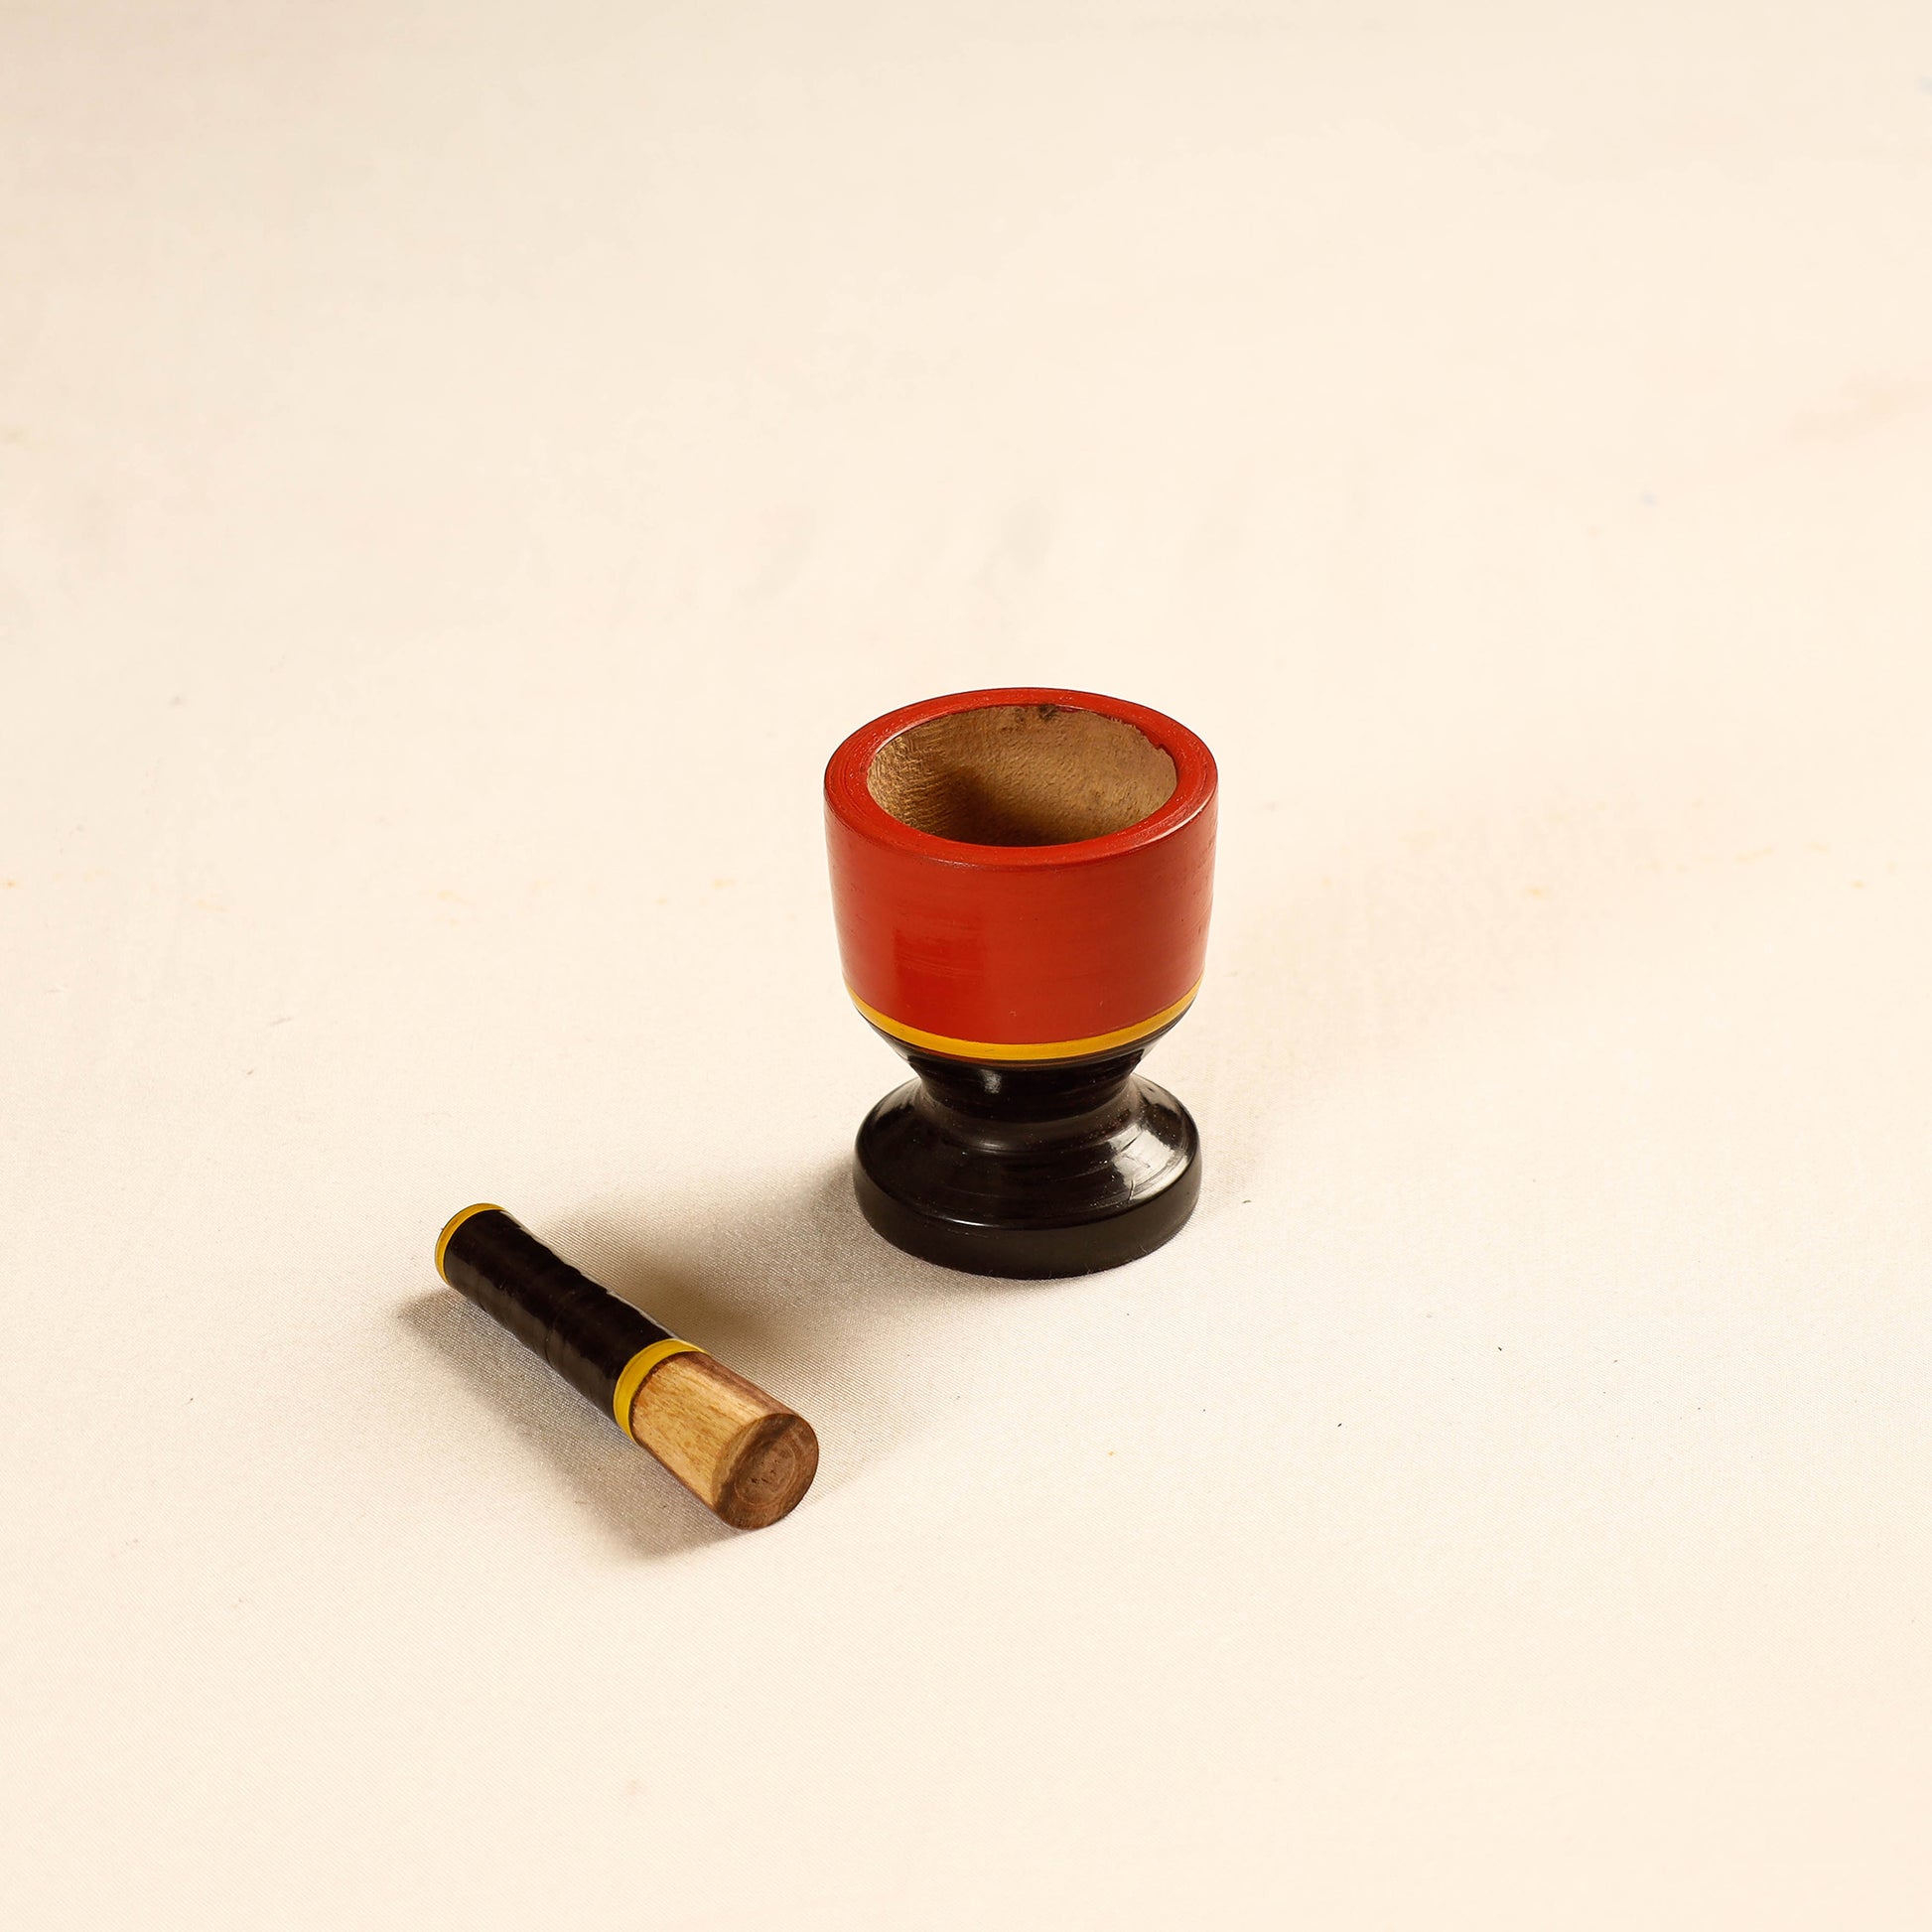 Wooden Mortar And Pestle
